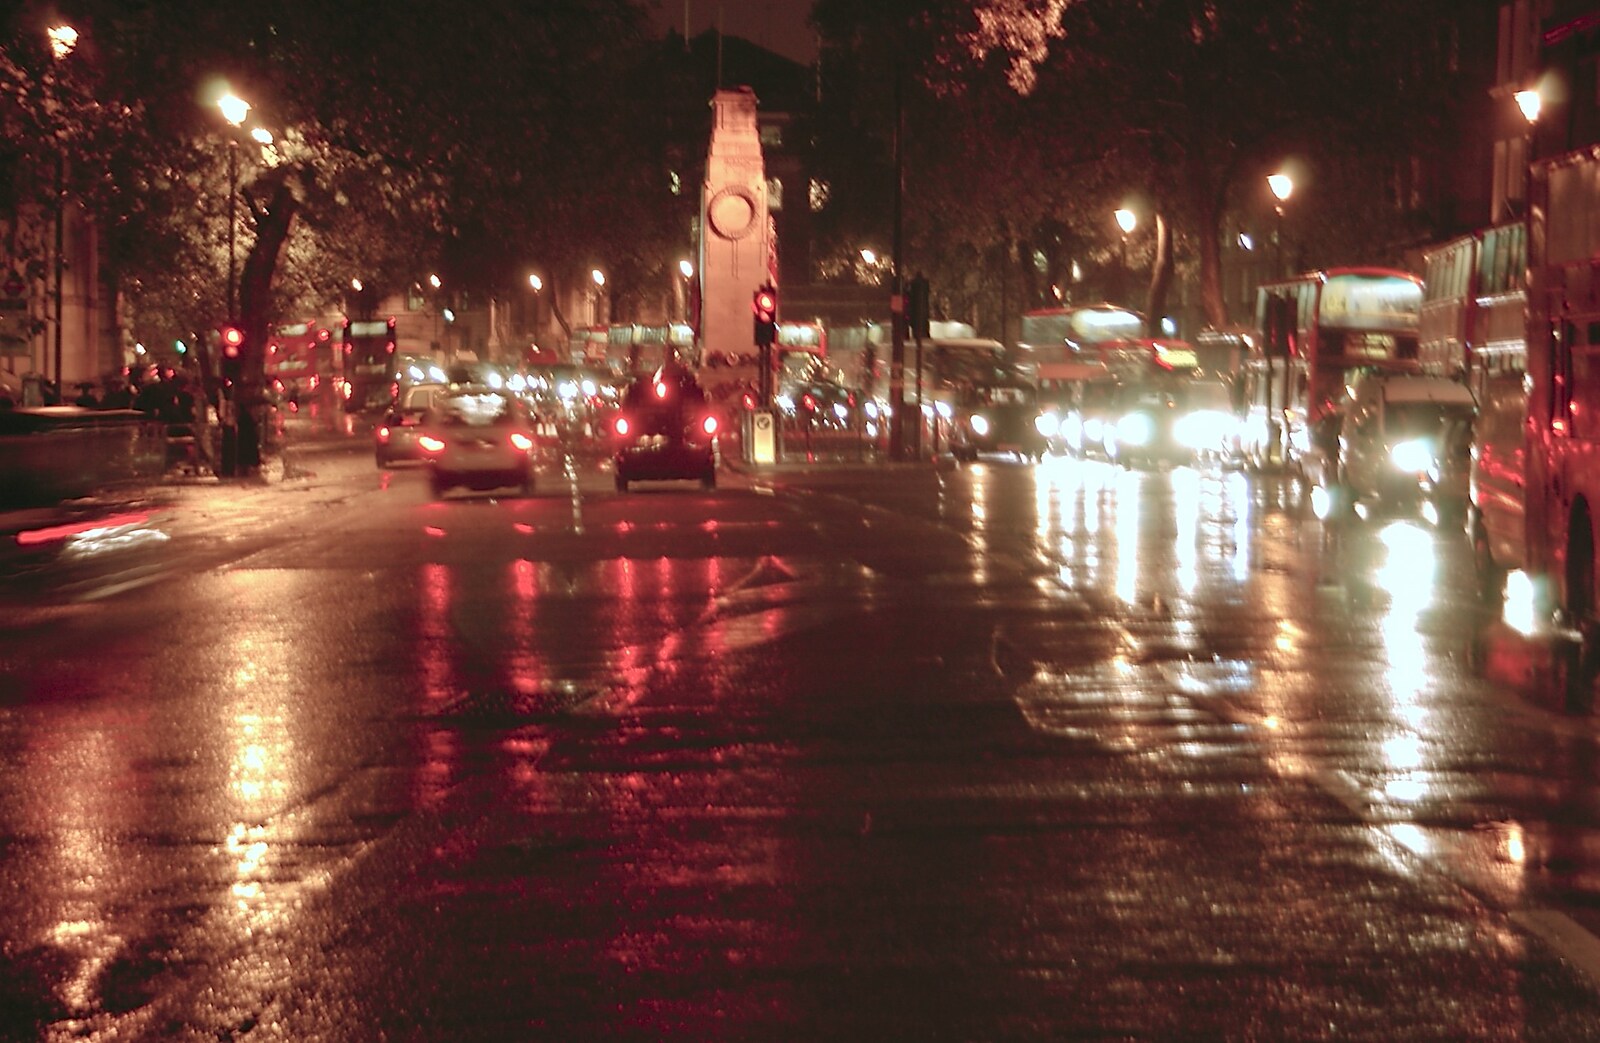 Looking up Whitehall to the Cenotaph from London in the Rain - 18th November 2004